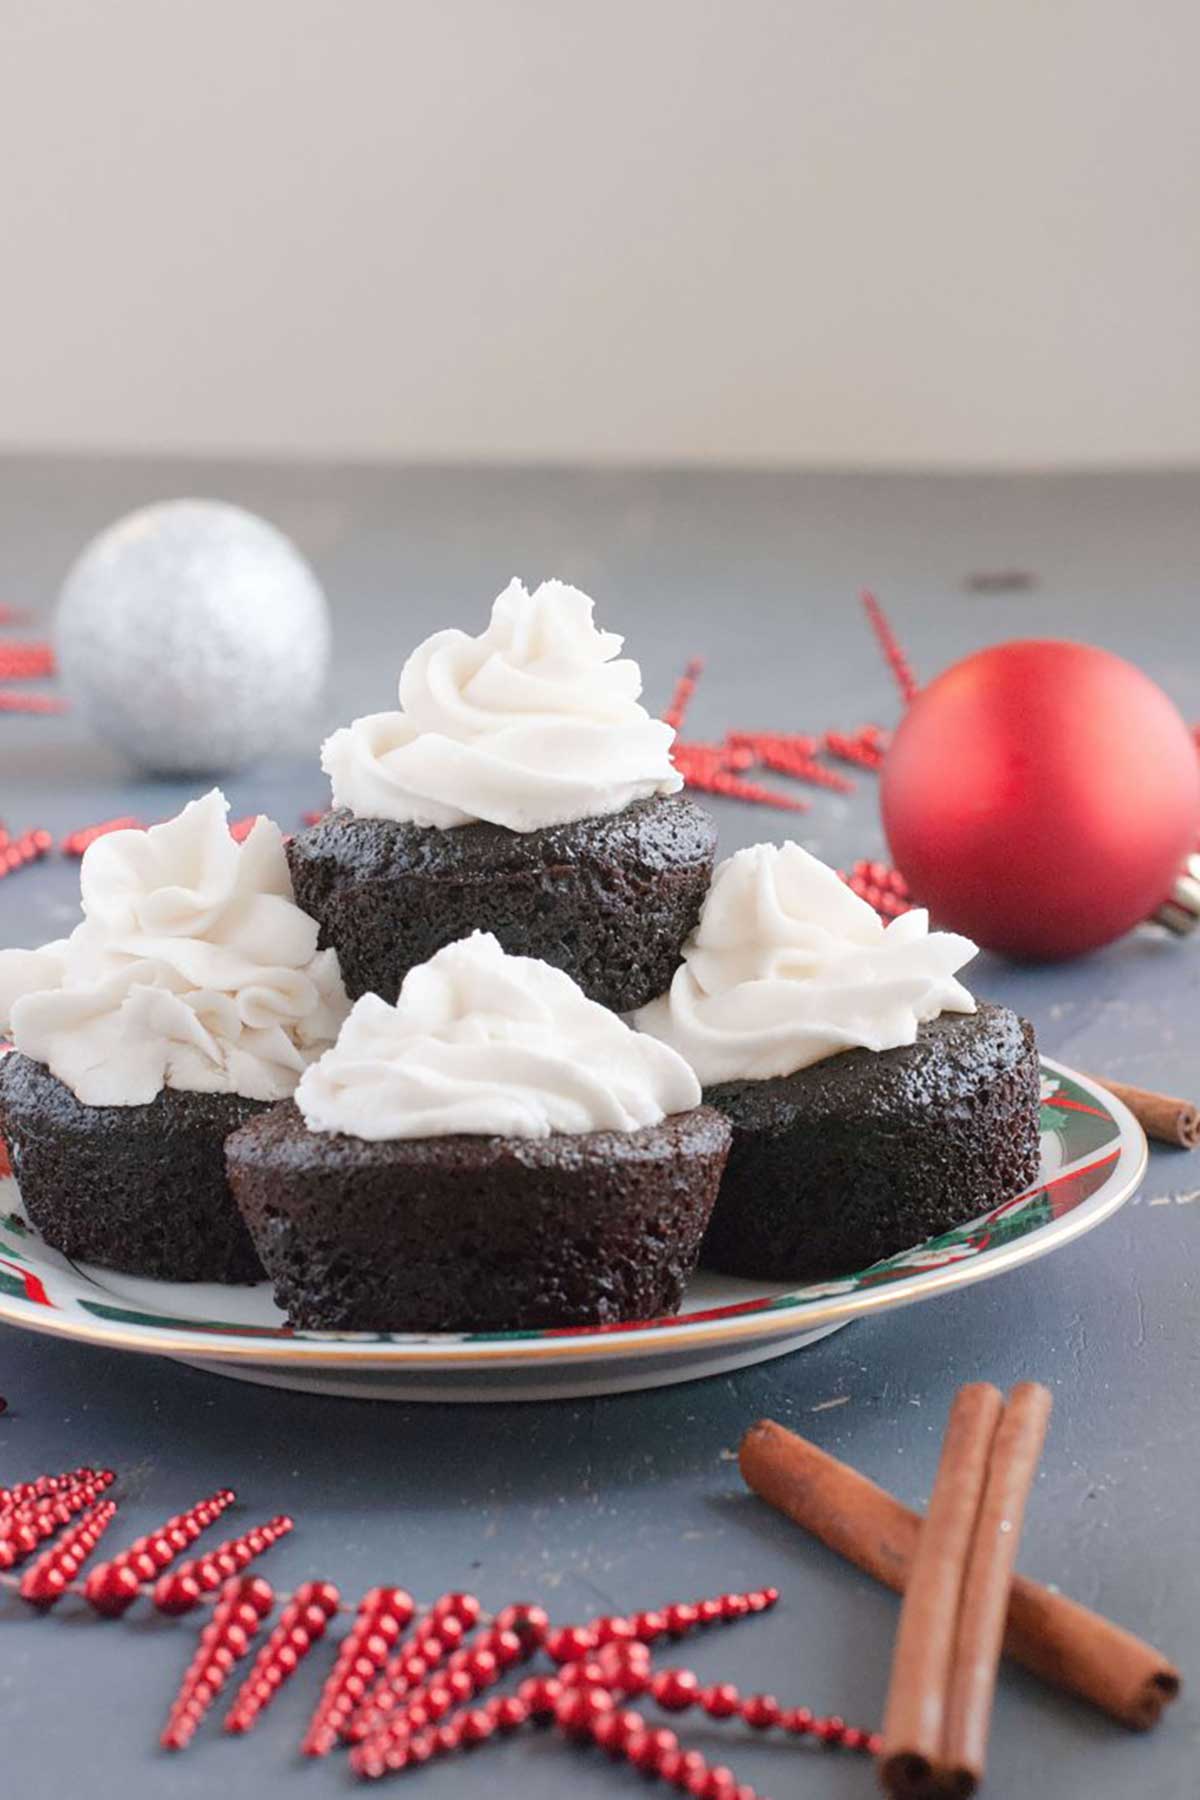 Chocolate Gingerbread Cupcakes